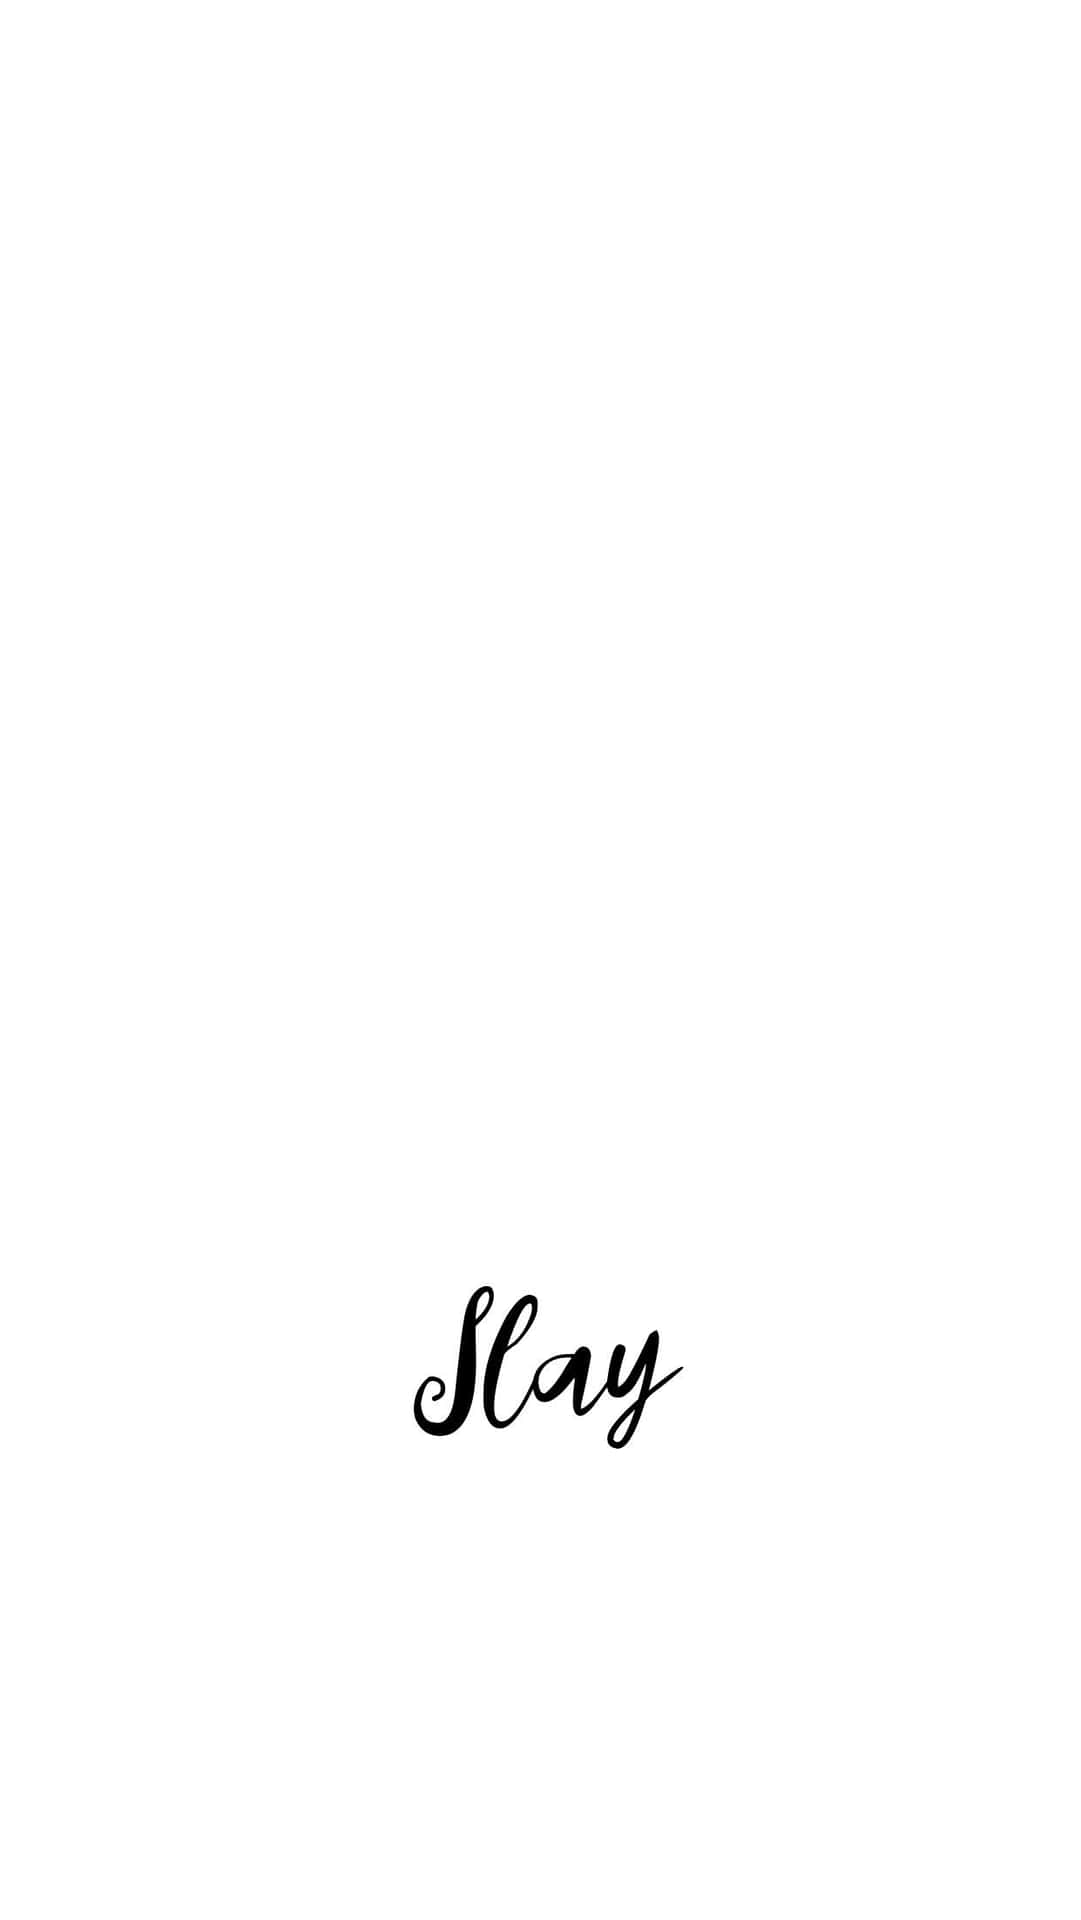 A stunning aesthetic white background perfect for phone lockscreens